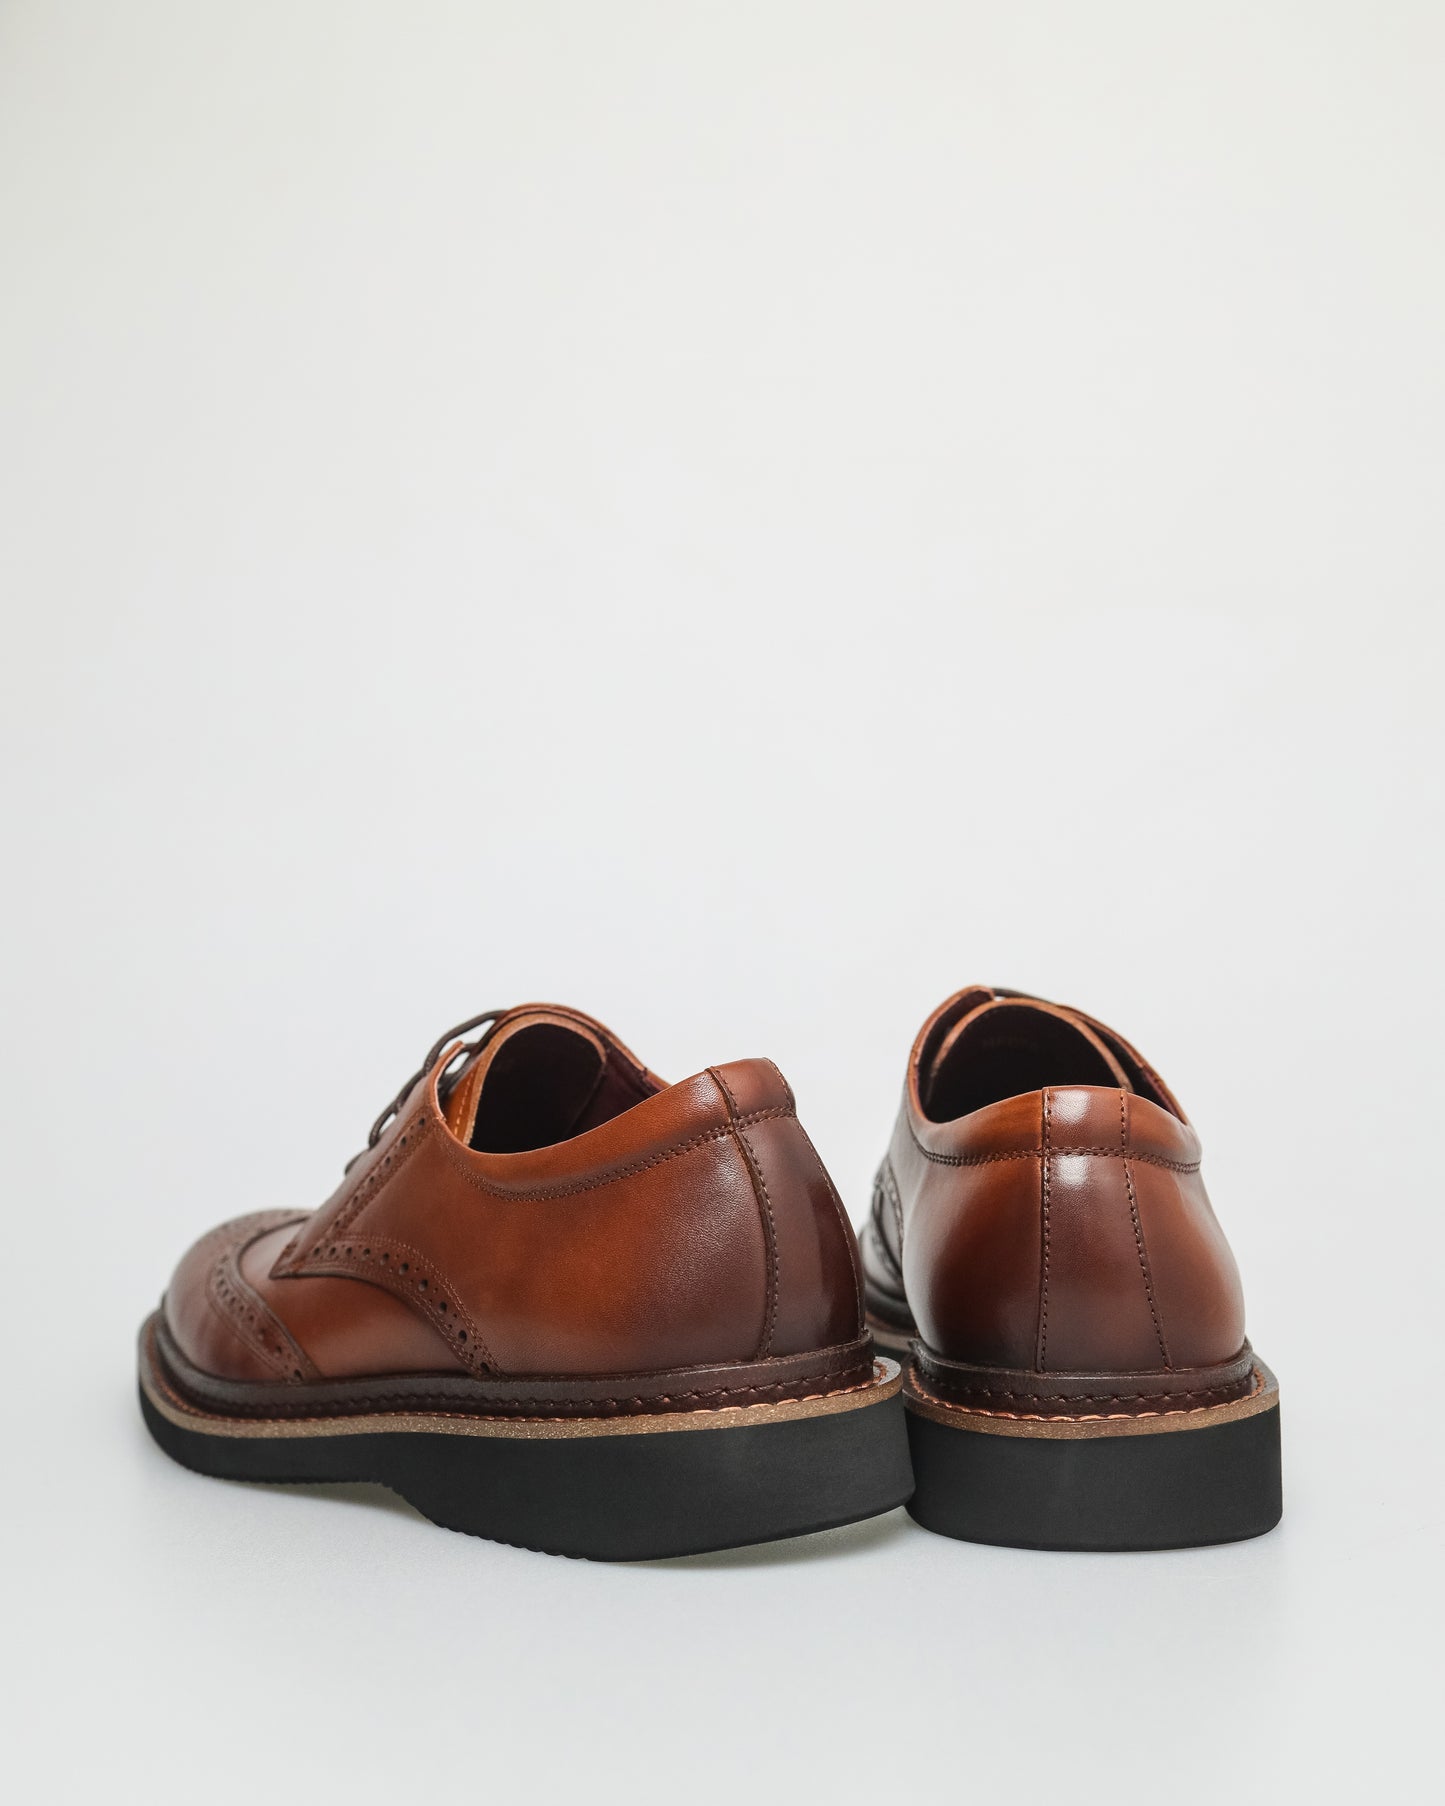 Tomaz HF078 Men's Classic Perforated Derby (Brown)